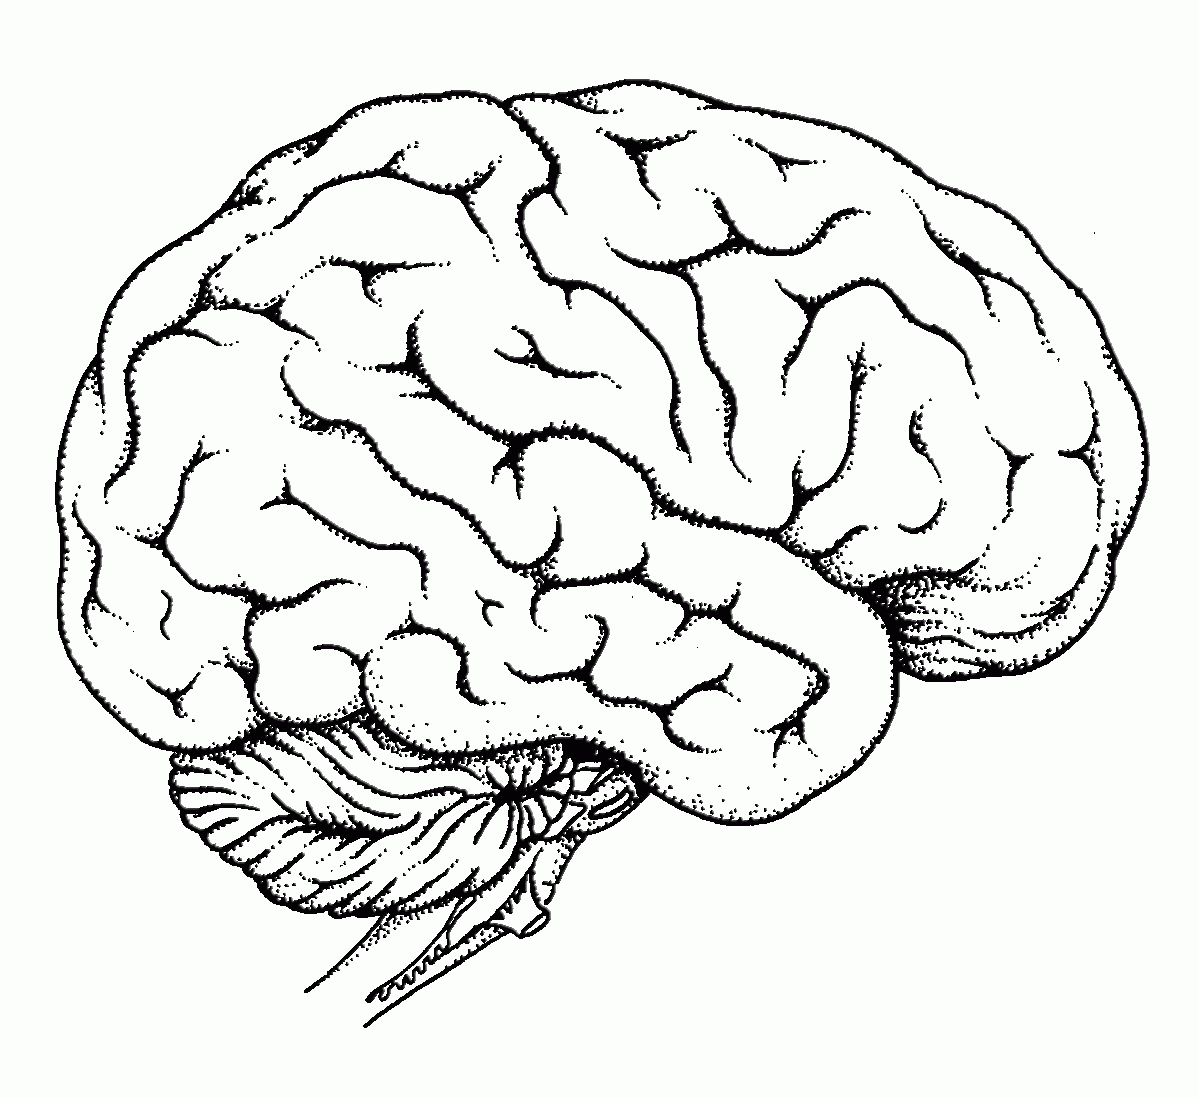 Human Brain Coloring Page Coloring Home — db-excel.com